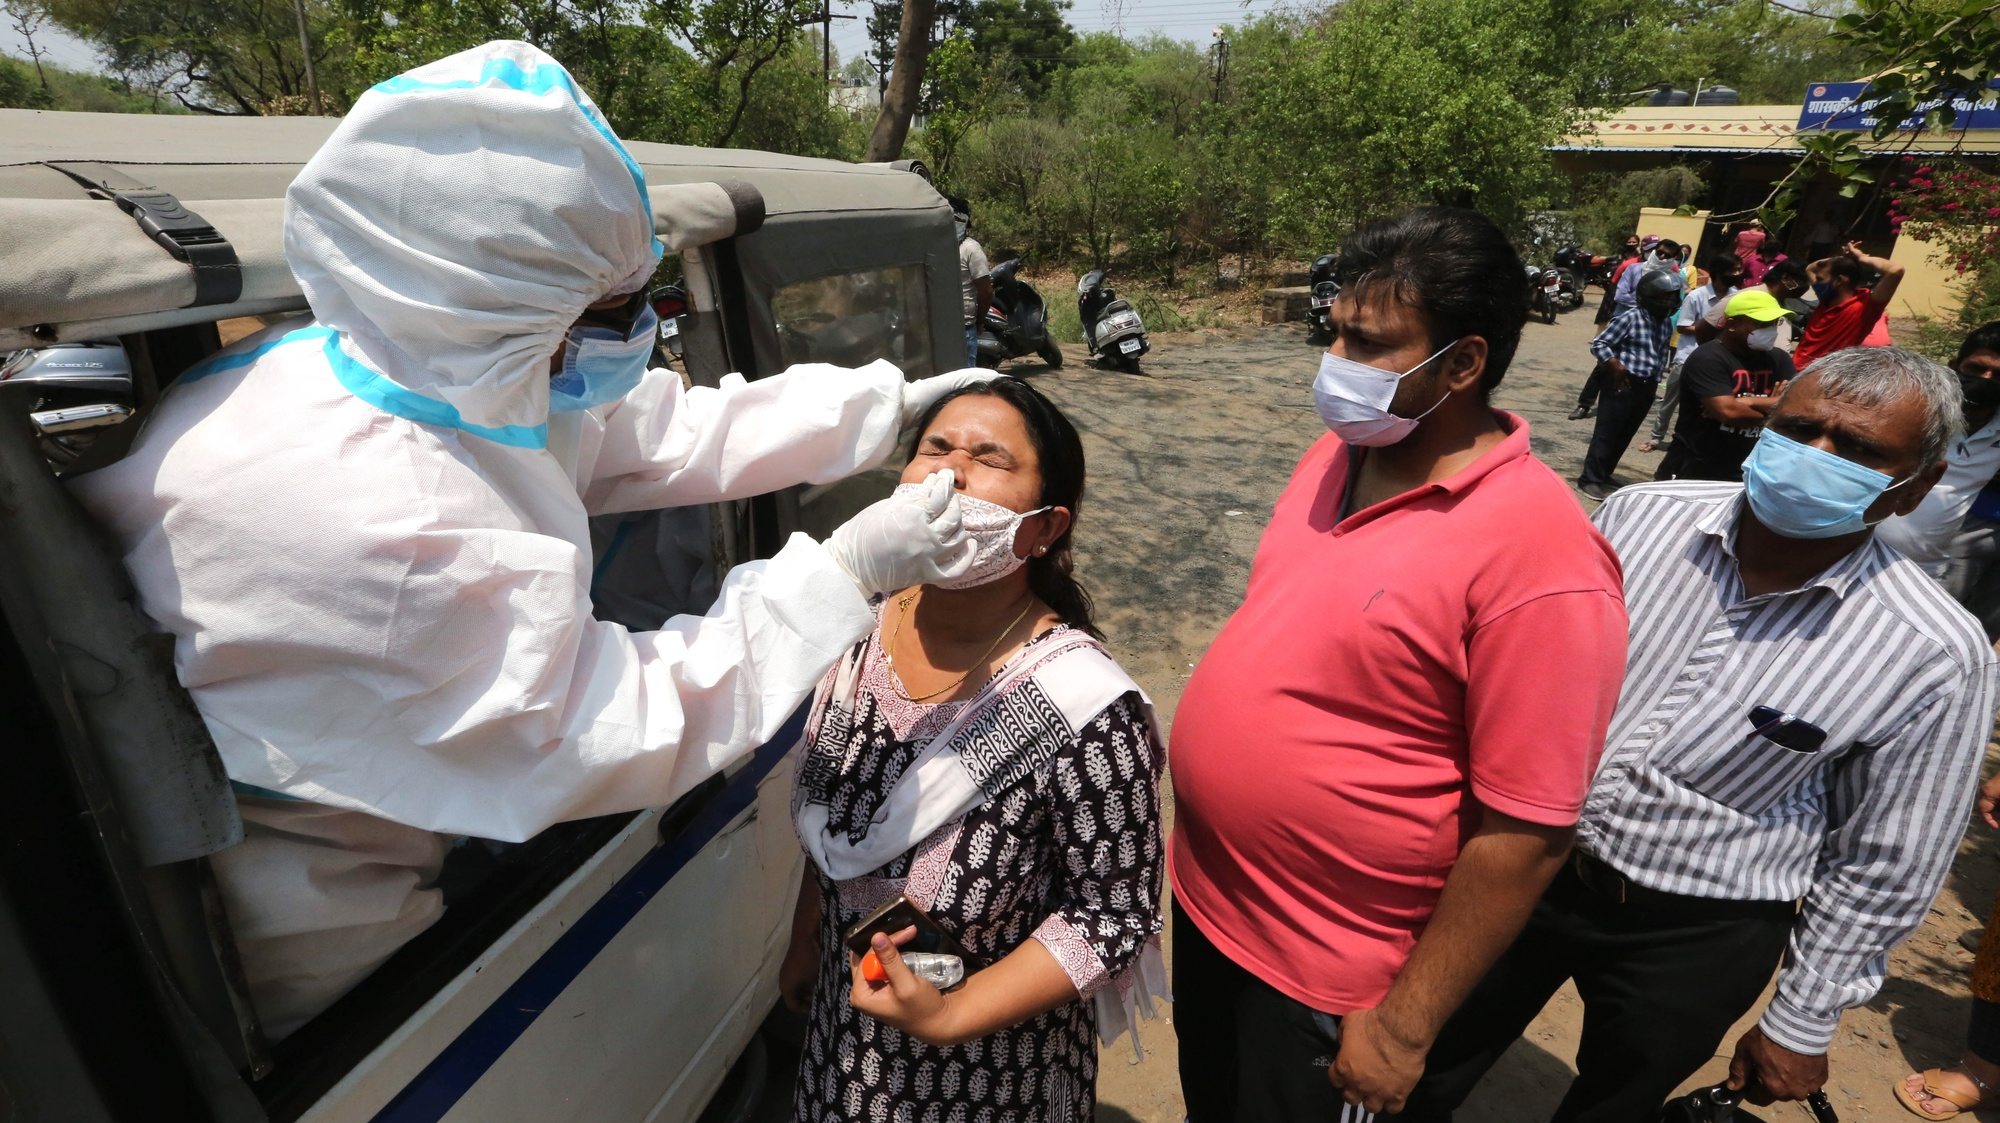 epa09126300 A woman undergos a Sars-Cov-2 swab test at a roadside in Bhopal, India, 10 April 2021. India officially recorded nearly 1,45,000 Covid-19 cases in the last 24 hours, the highest number of new daily coronavirus infections in the country since the start of the pandemic. India is seeing a second wave of the virus which has led several states including Maharashtra, Madhya Pradesh and  New Delhi, to impose new restrictions.  EPA/SANJEEV GUPTA